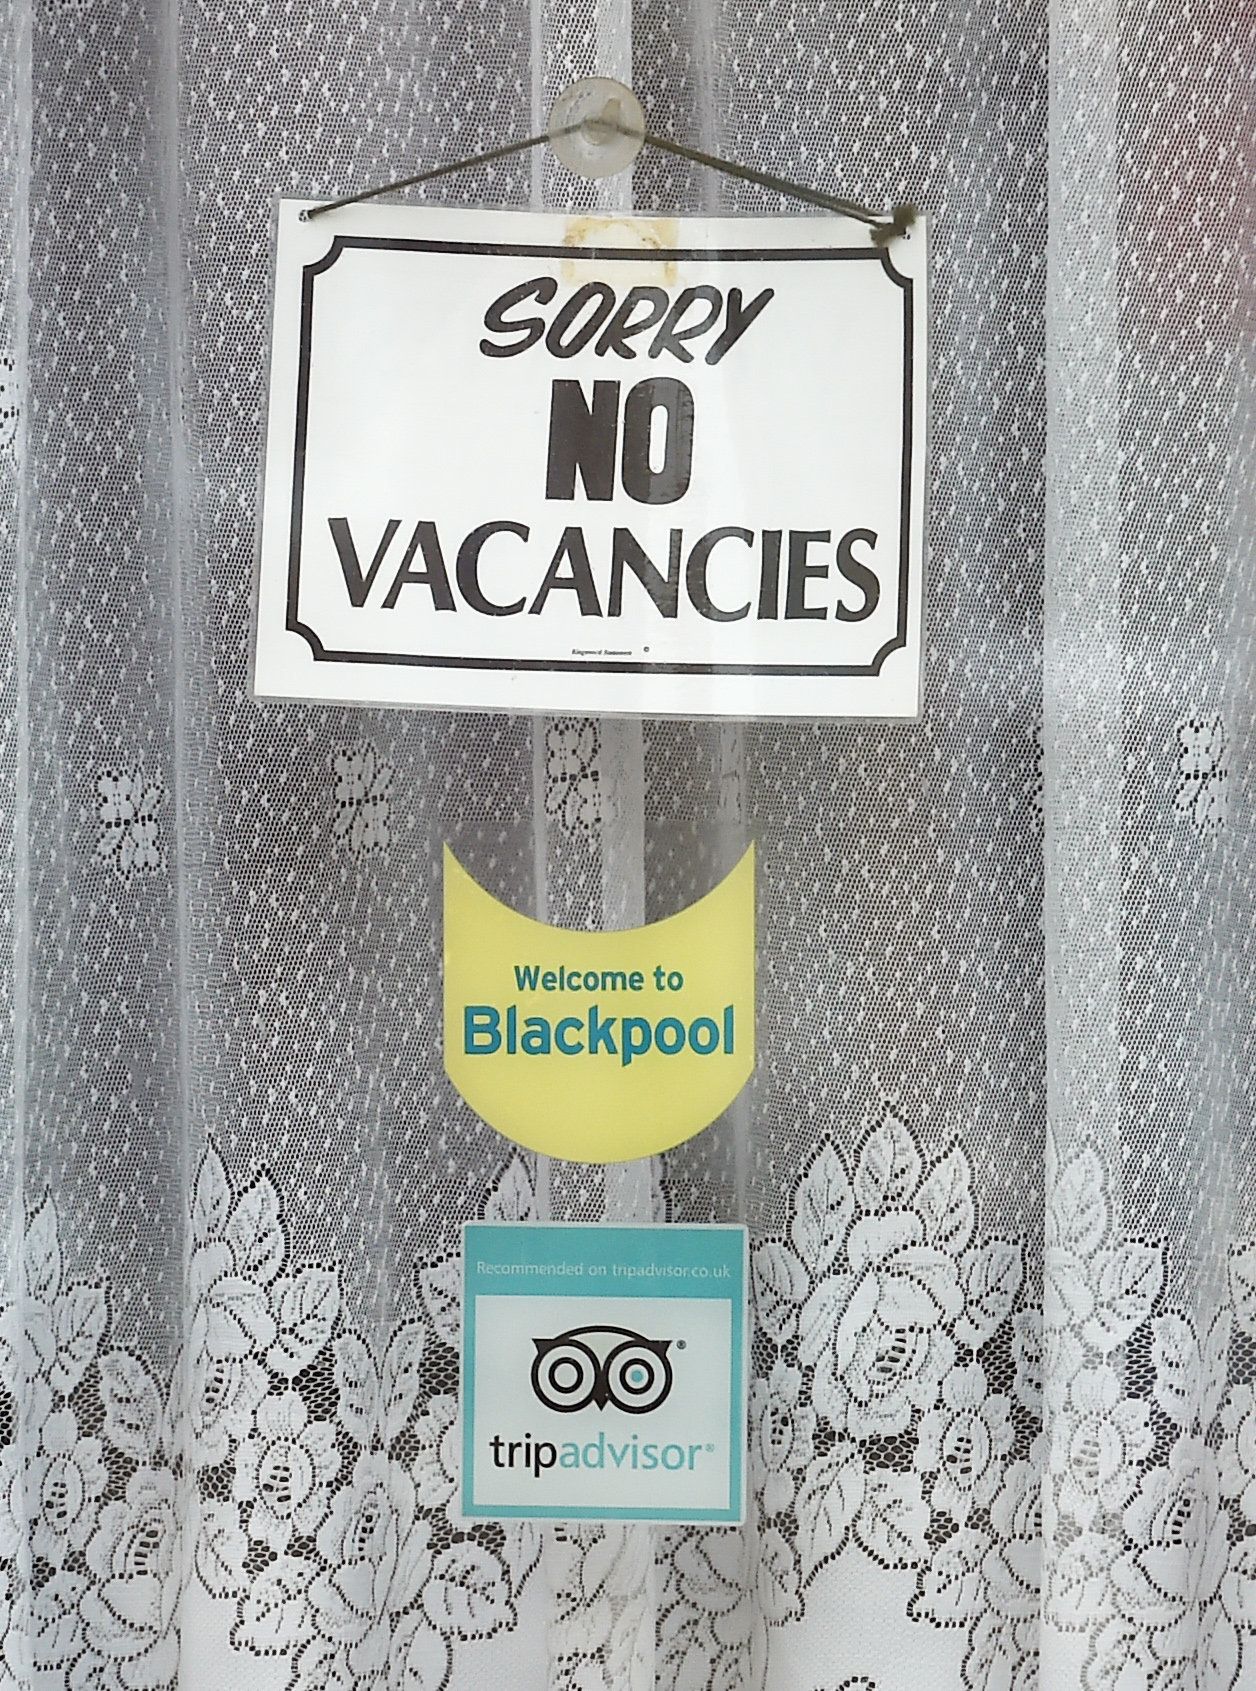 A vacancy sign is seen in the window of a Bed and Breakfast guest house in Blackpool.